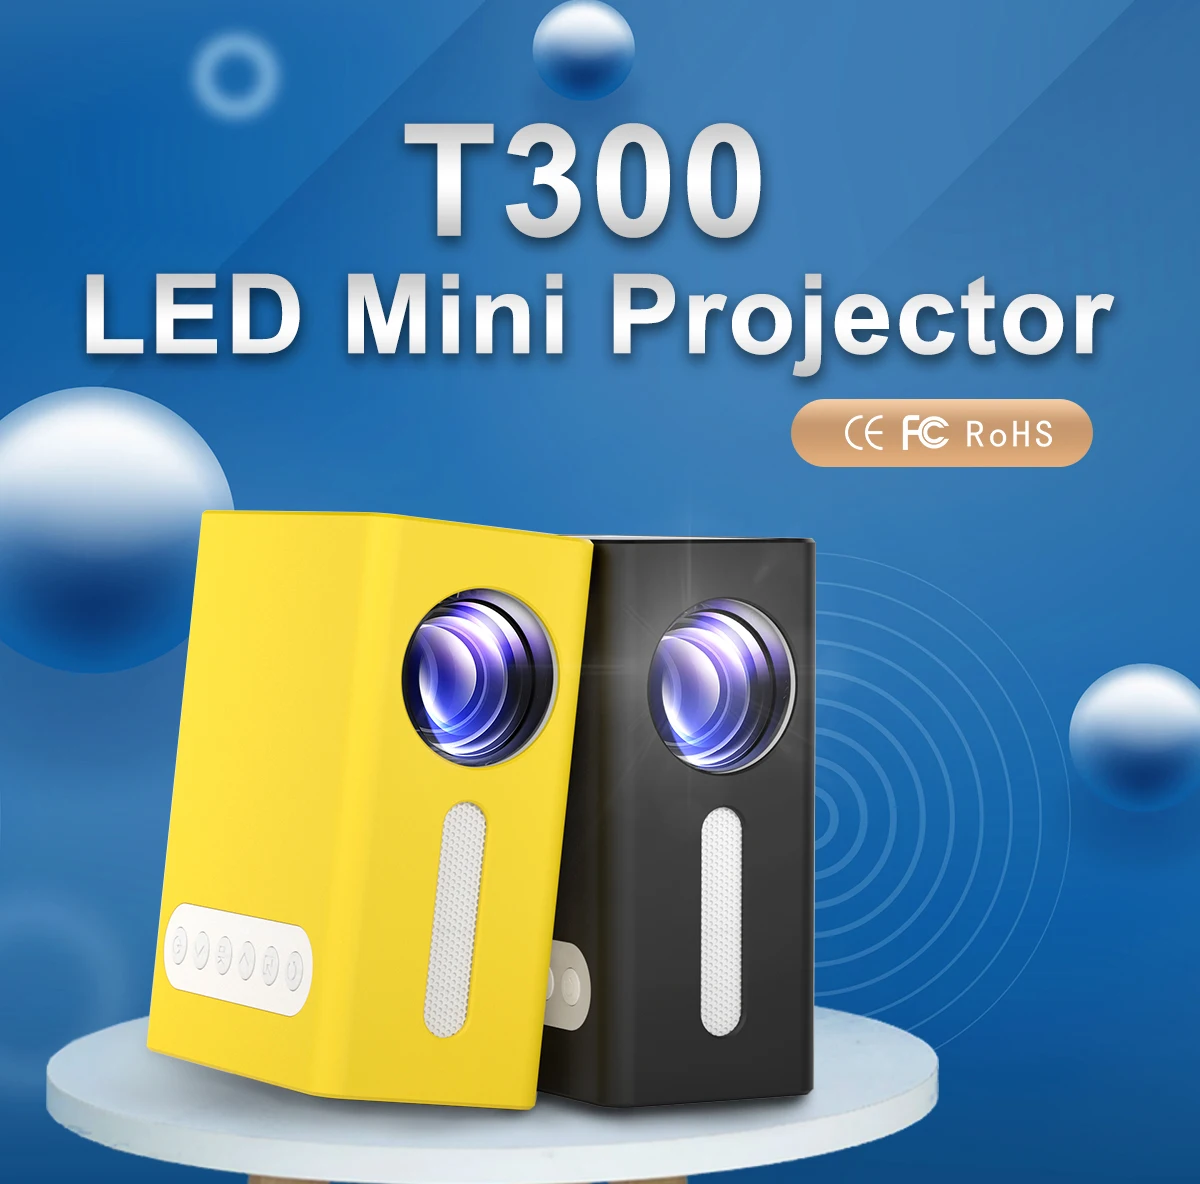 

Salange T300 LED Mini Projector Mirror Phone 1080P Supported Home Theater Beamer HDMI USB Movie Video Portable Outdoor TV Stick